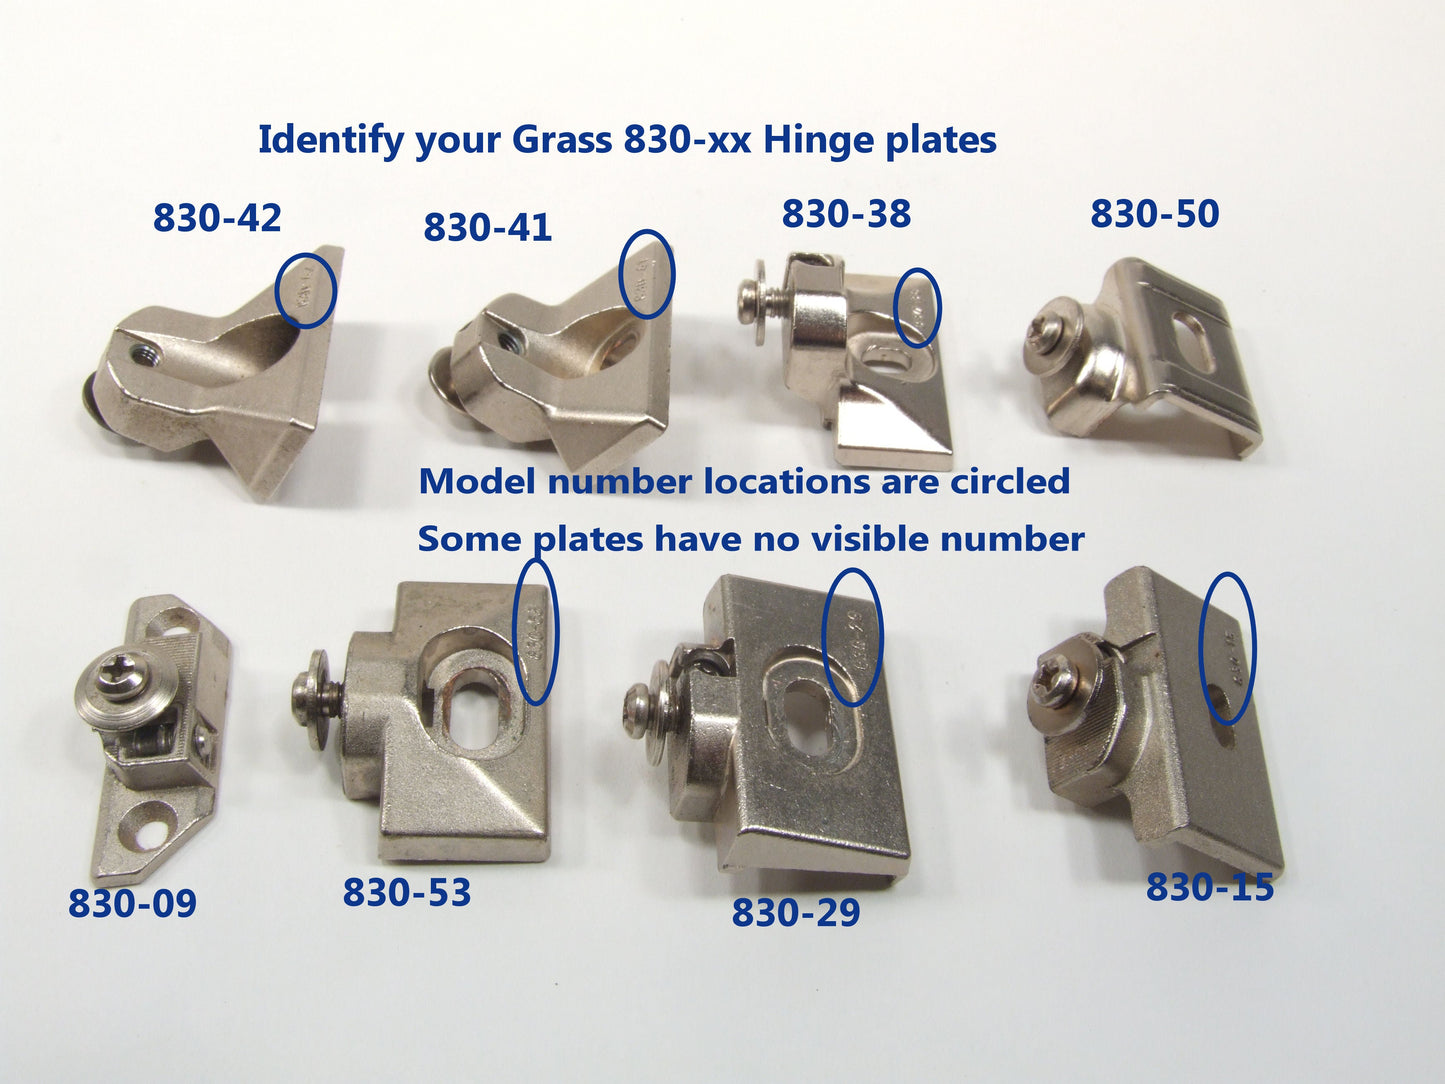 Grass 830-14 Soft Close Replacement Hinges - Sold as PAIRS!